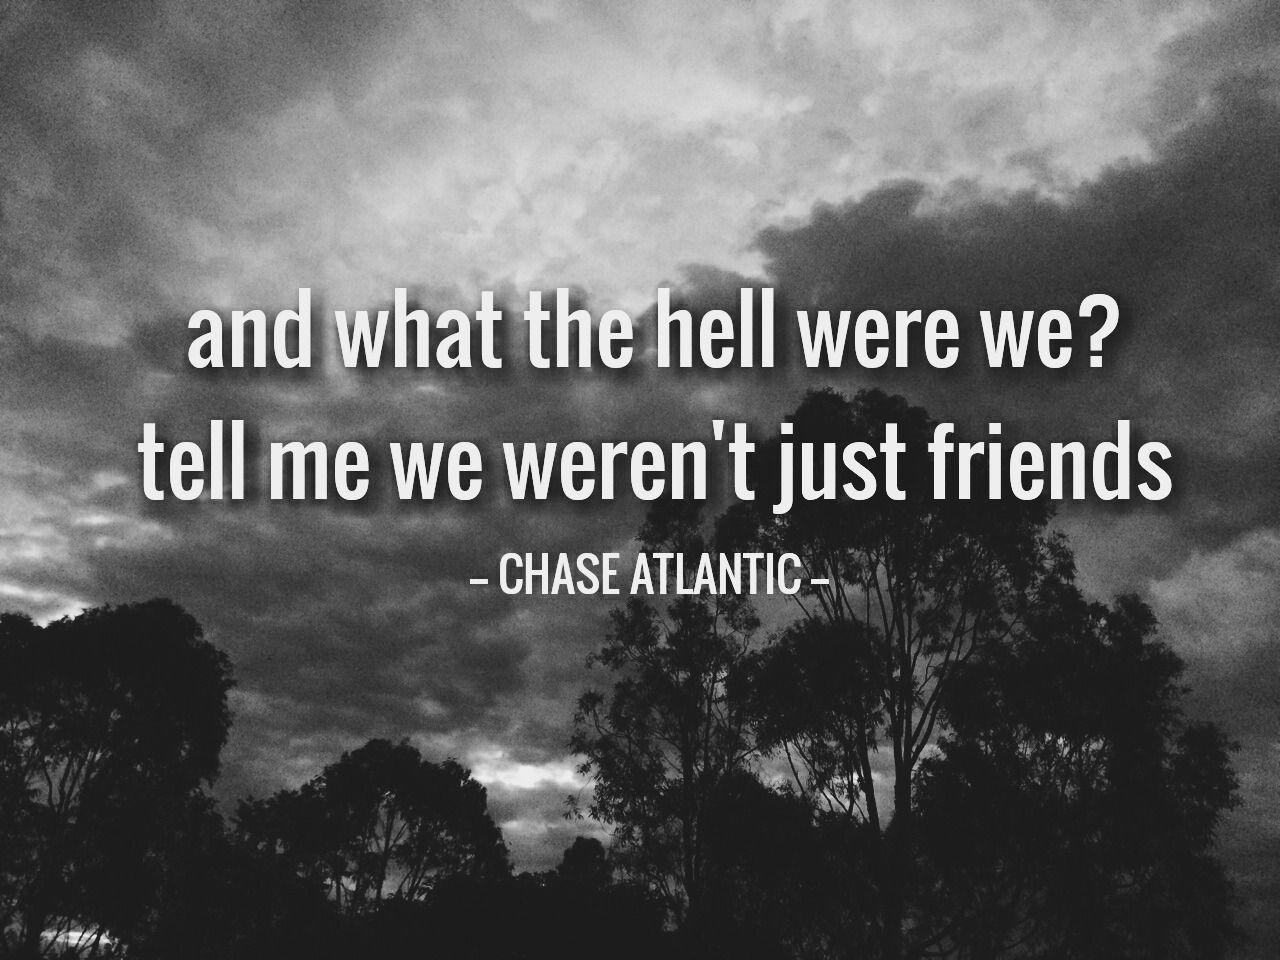 image about Chase Atlantic